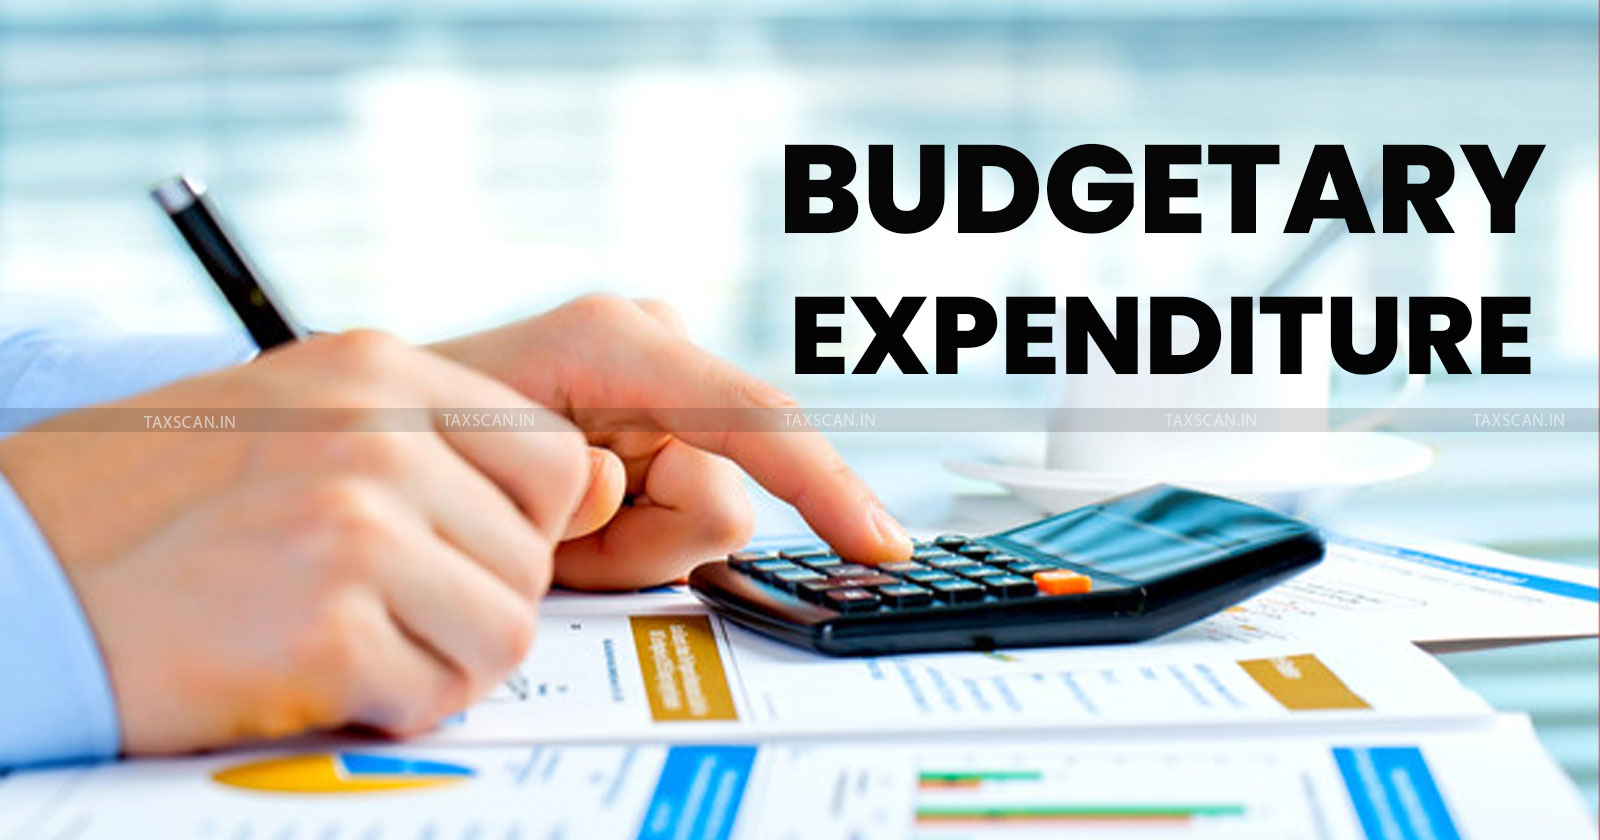 Budgetary Expenditure - Union Budget - TAXSCAN